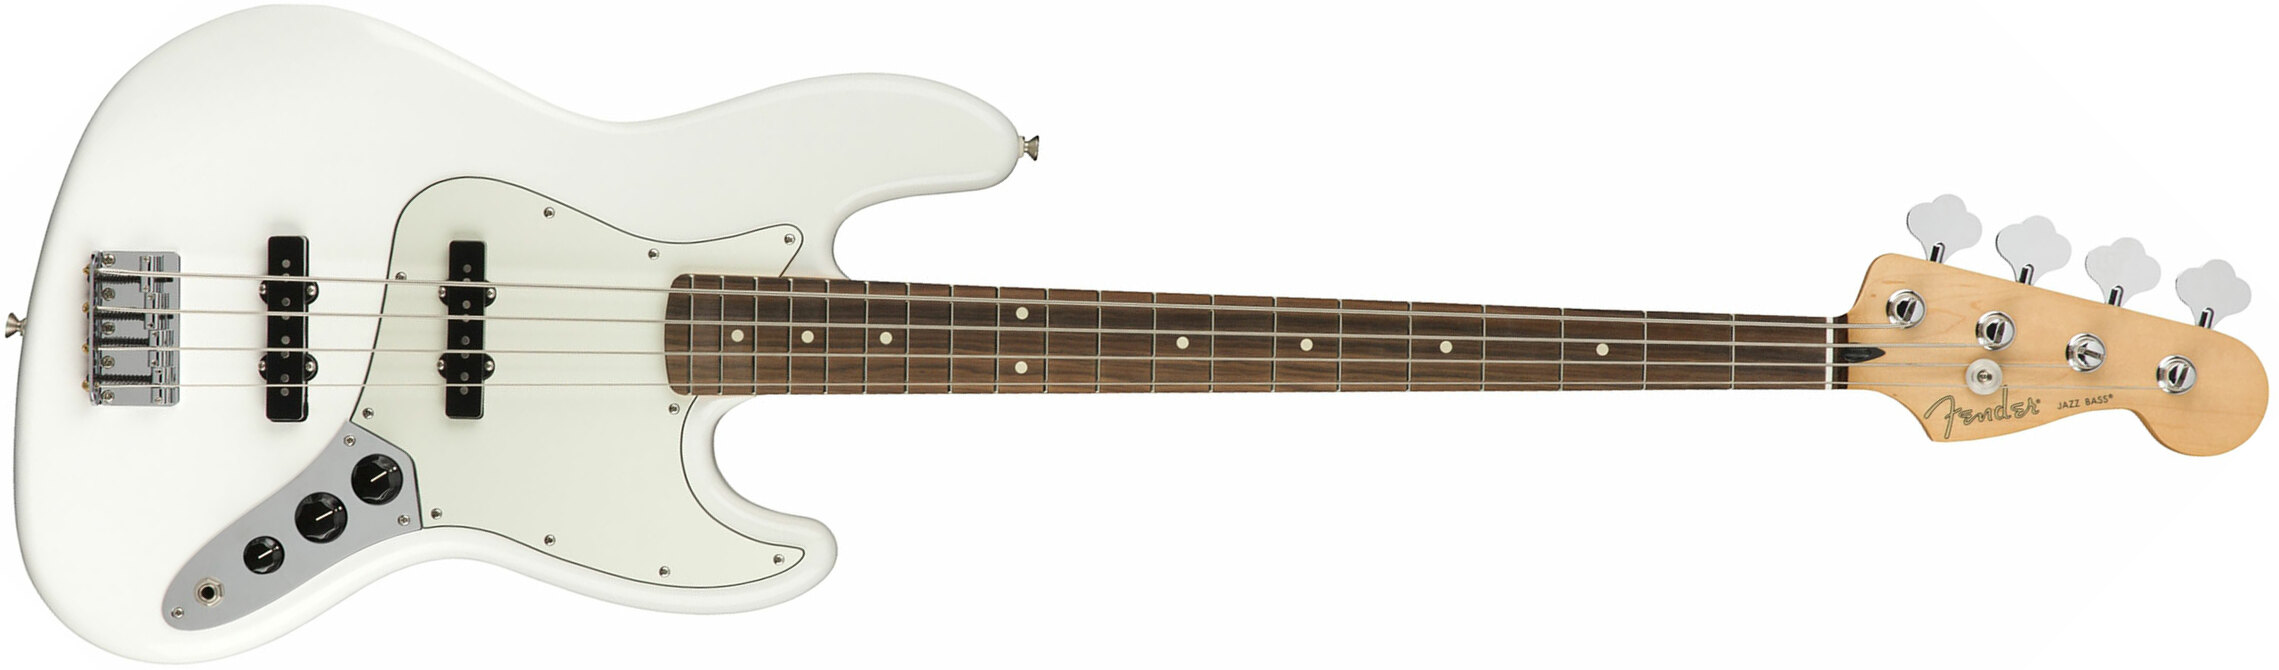 Fender Jazz Bass Player Mex Pf - Polar White - Solid body electric bass - Main picture